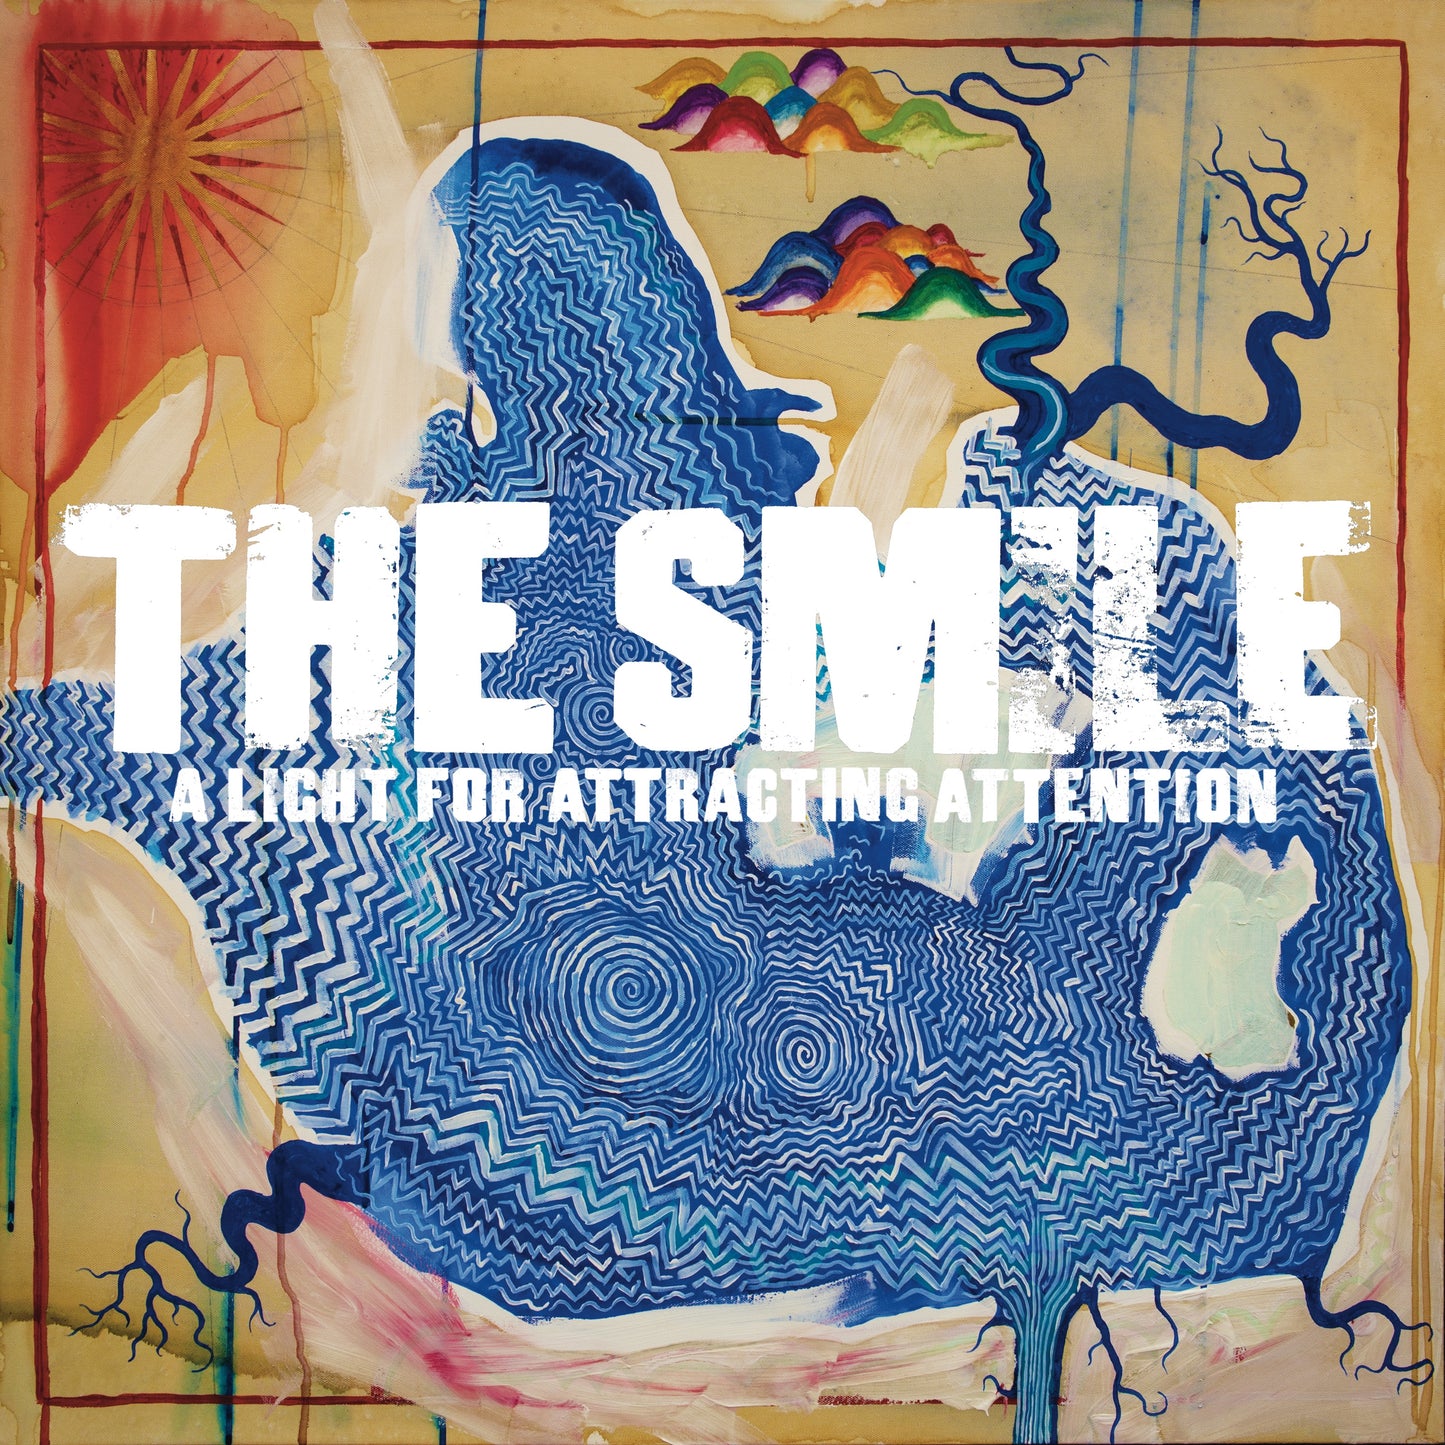 The Smile - A Light For Attracting Attention (Limited Edition Yellow Vinyl)